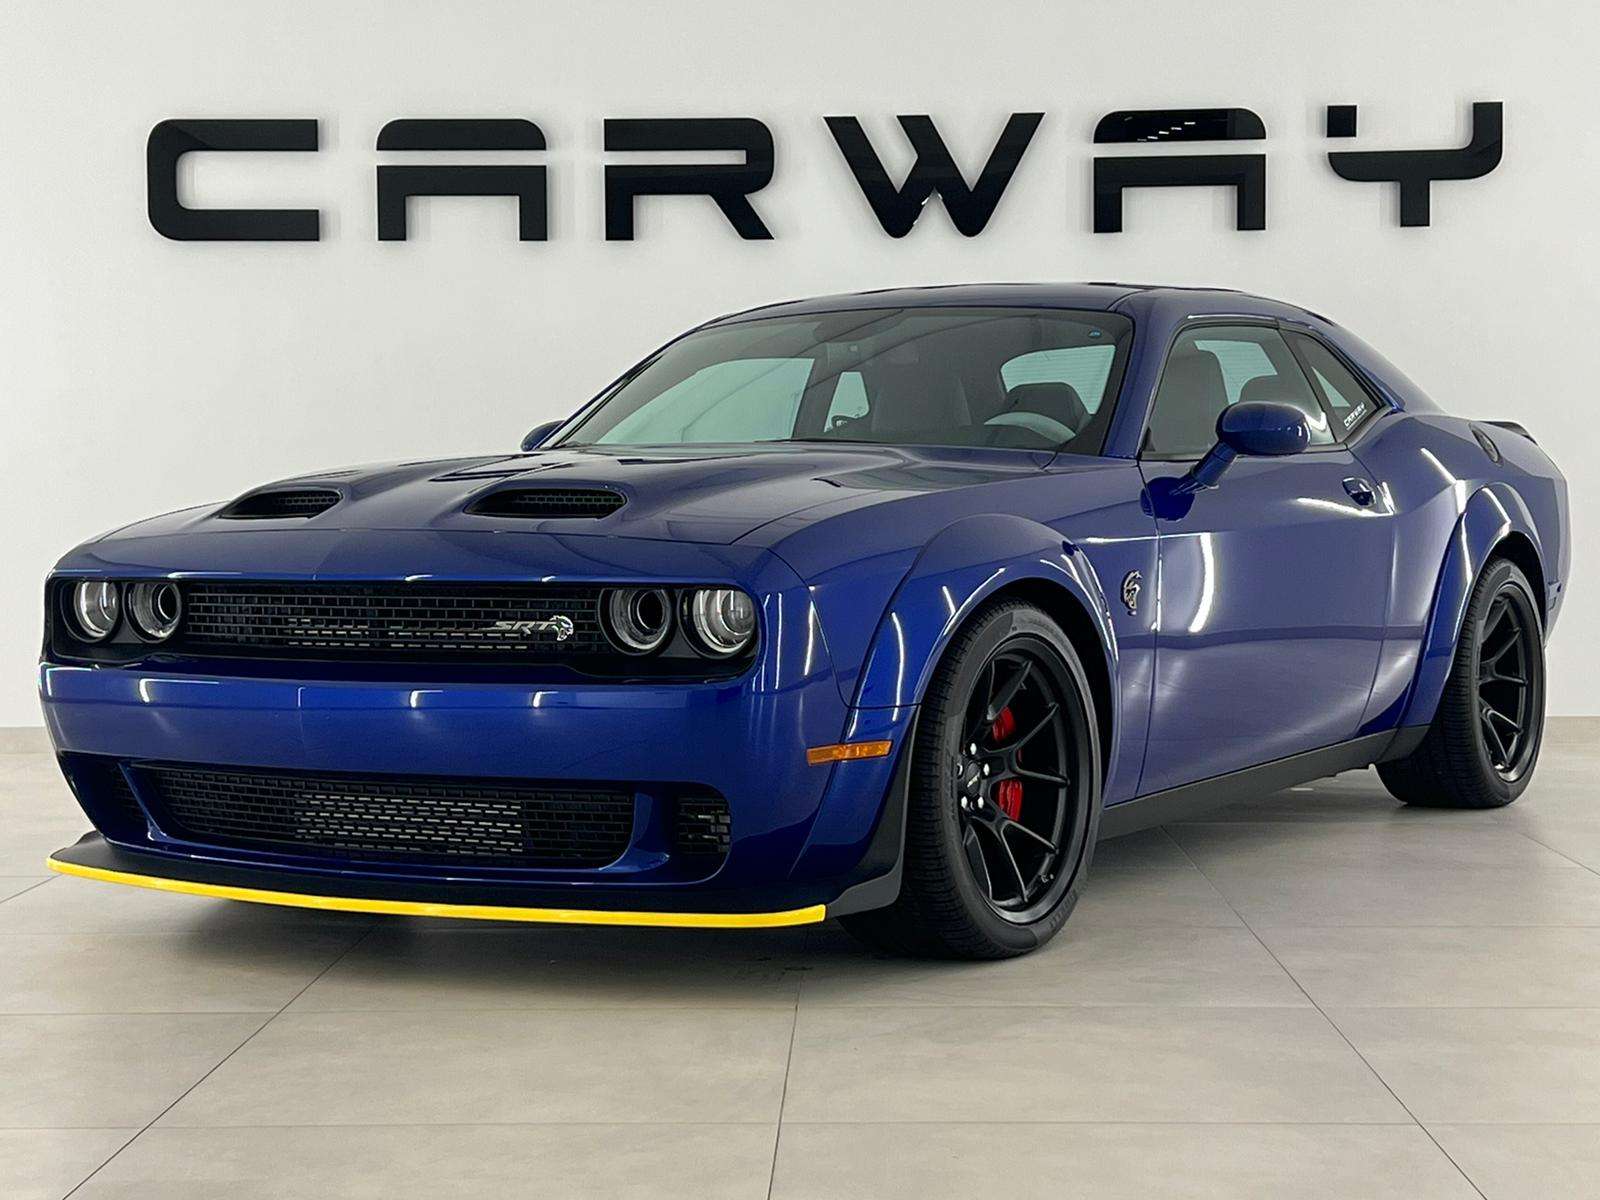 Dodge Challenger Coupe in Blue used in AMSTERDAM for € 269,000.-